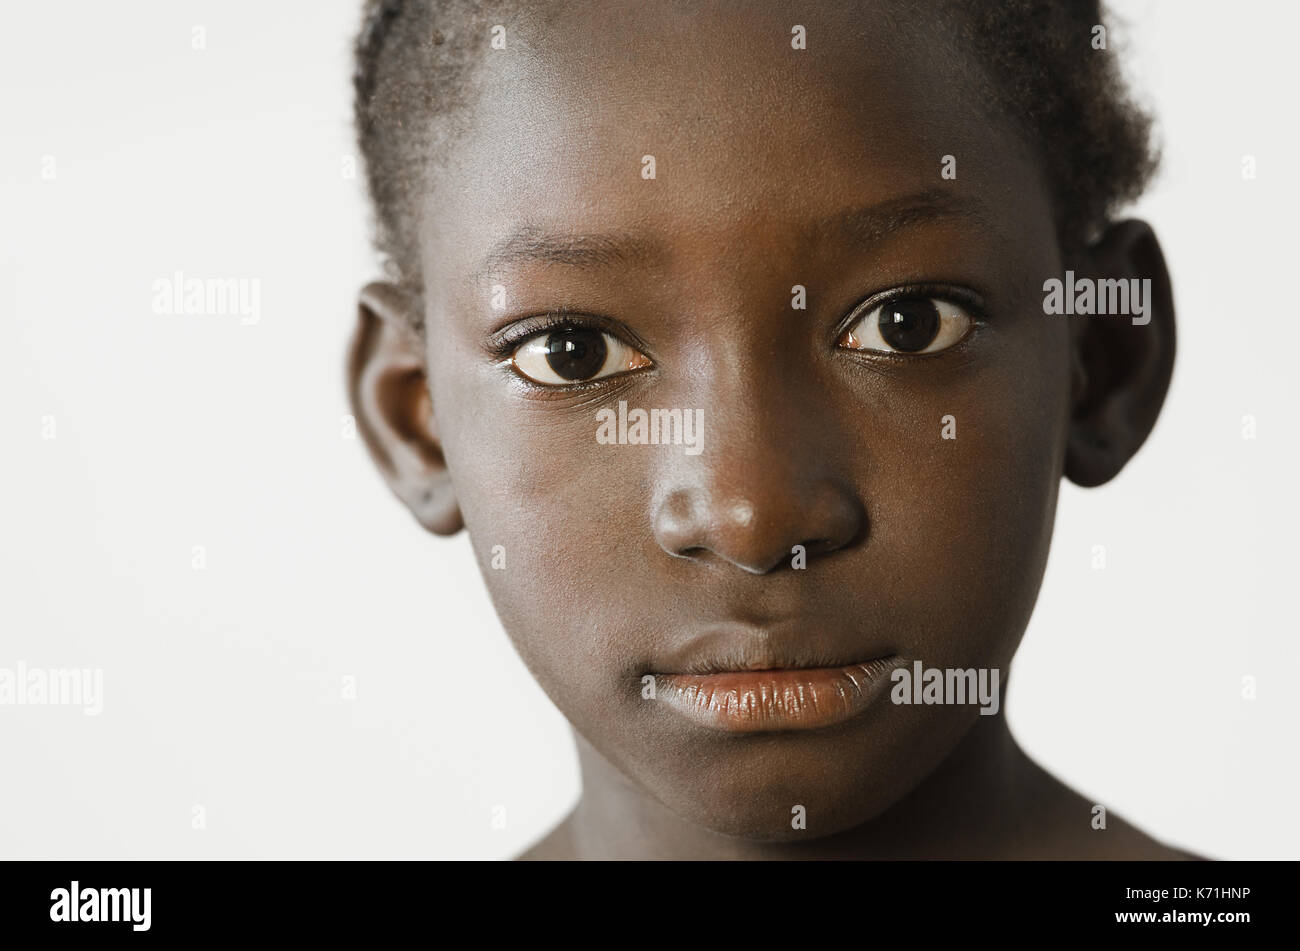 Sad African child showing her face for a portrait, sadness despair symbol, isolated on white Stock Photo